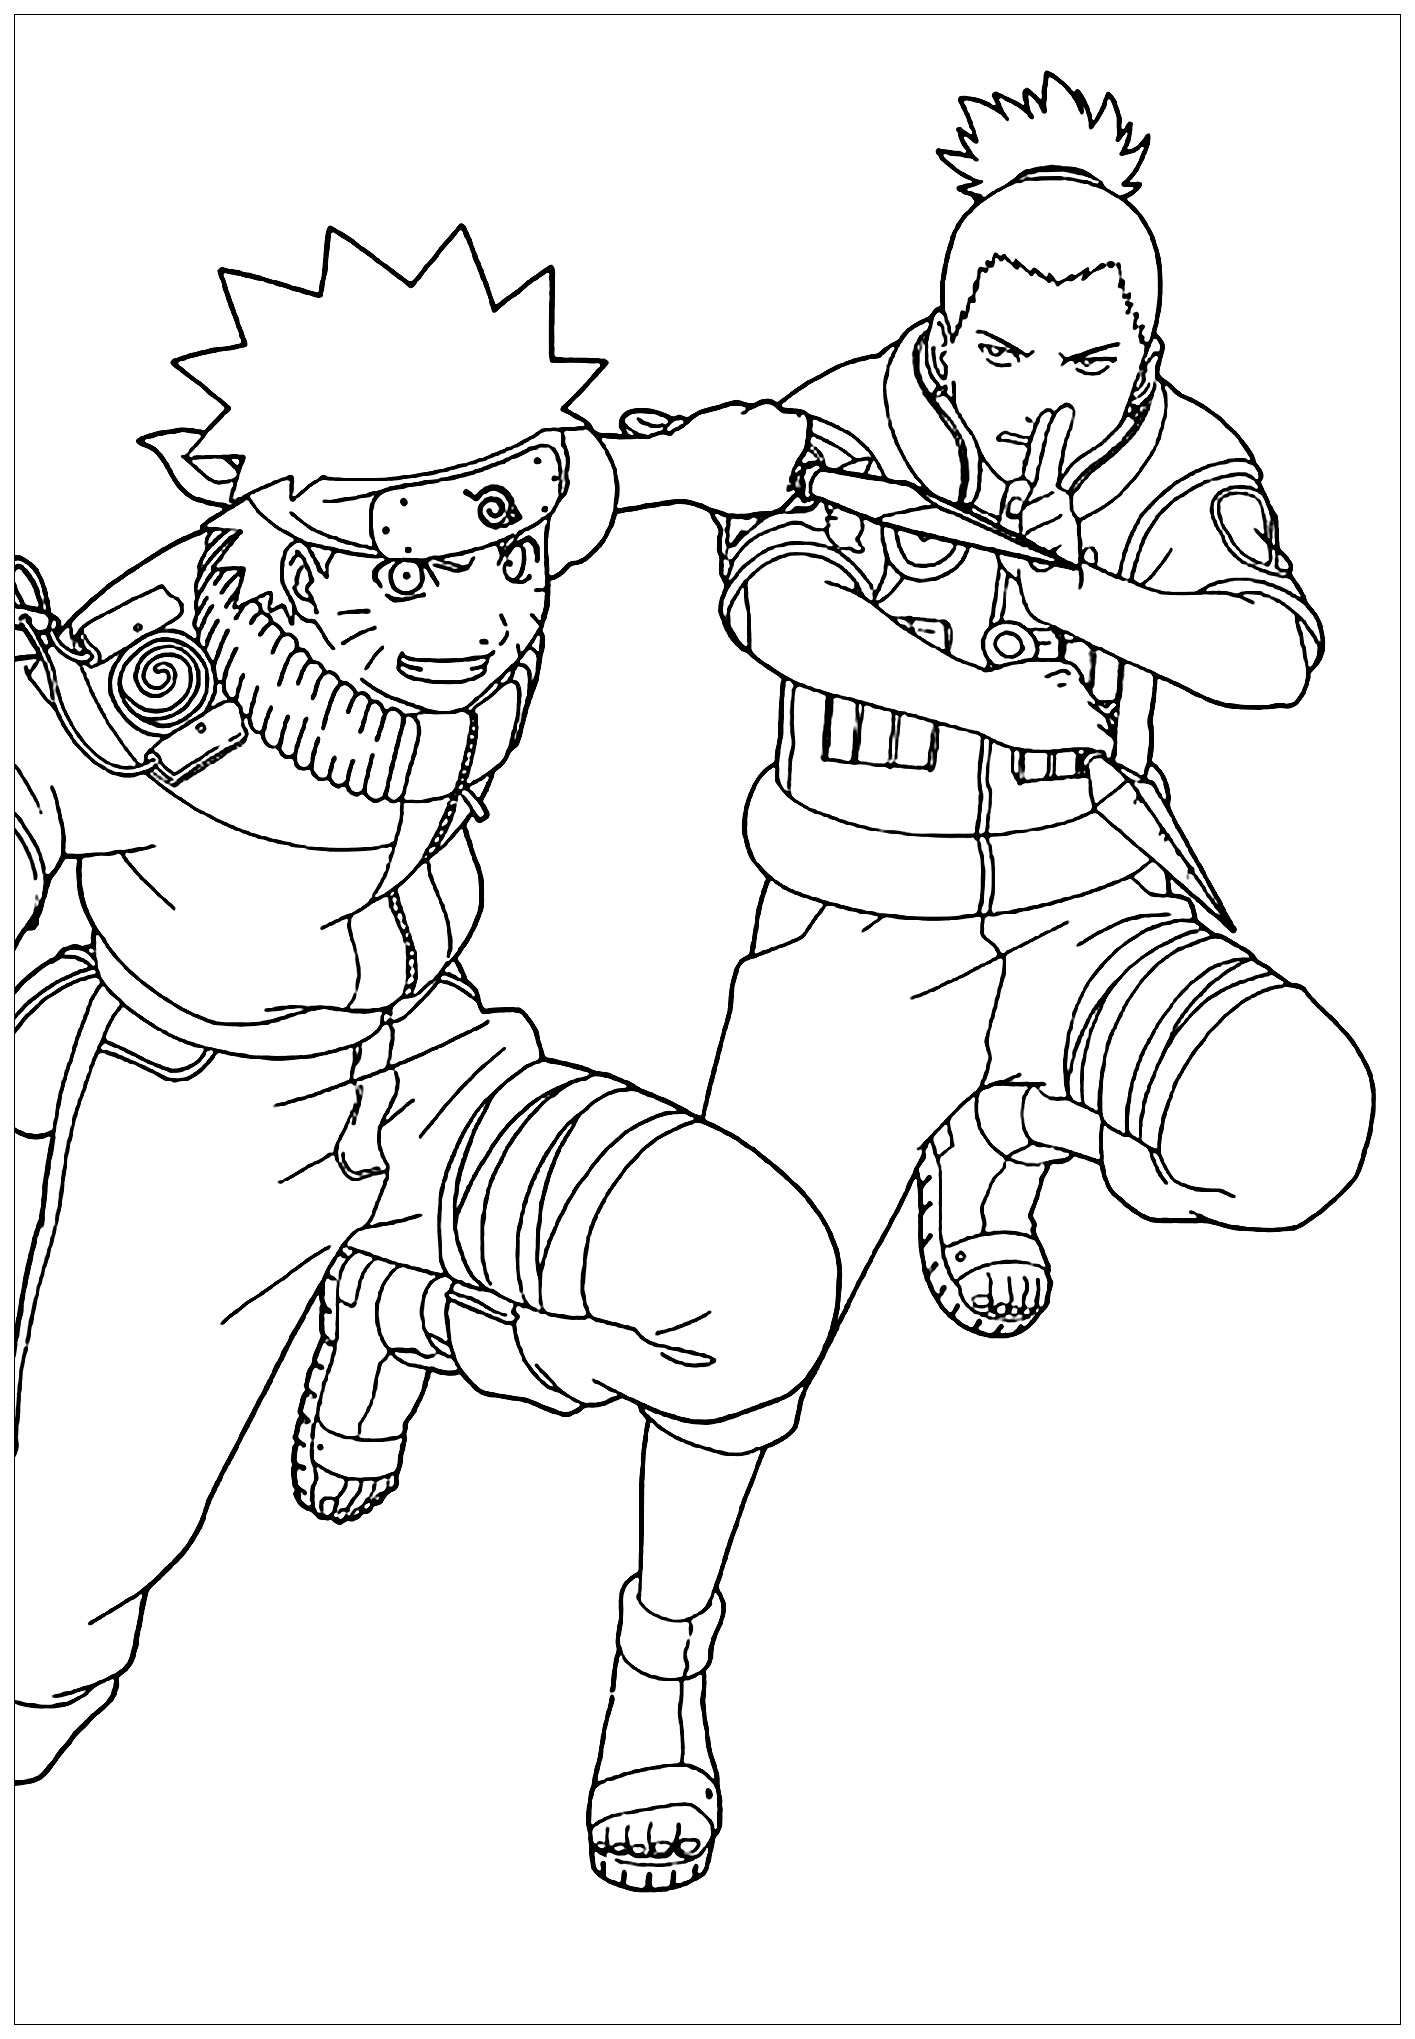 Naruto to color for children   Naruto Kids Coloring Pages